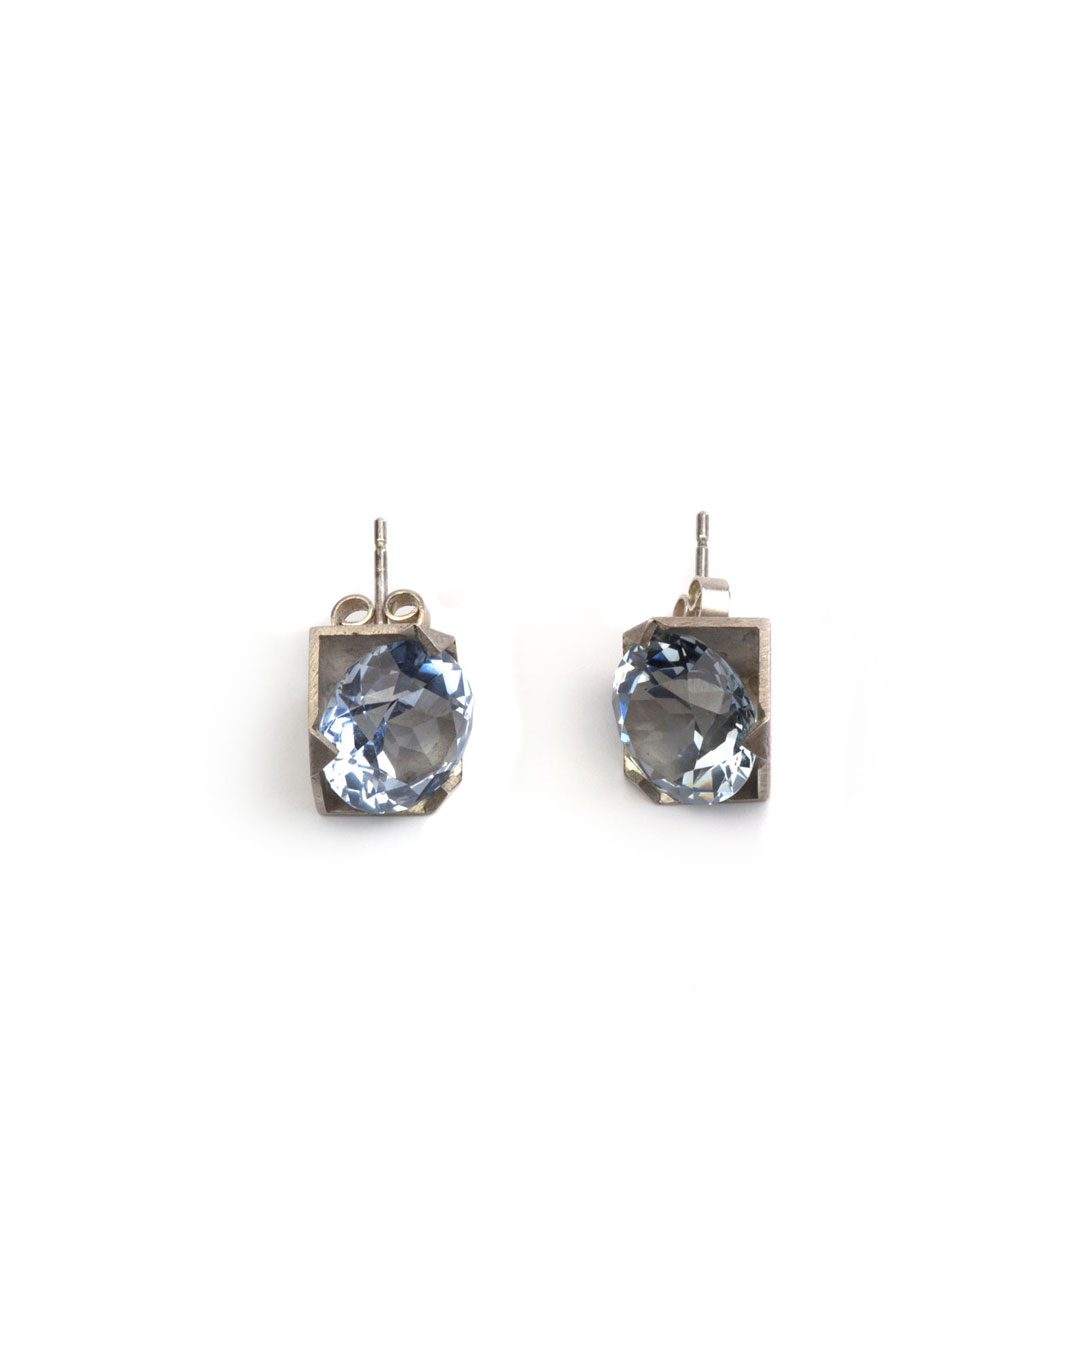 Herman Hermsen, untitled, 2020, earrings; silver, synthetic stone, 20 x 10 x 10 mm, €425